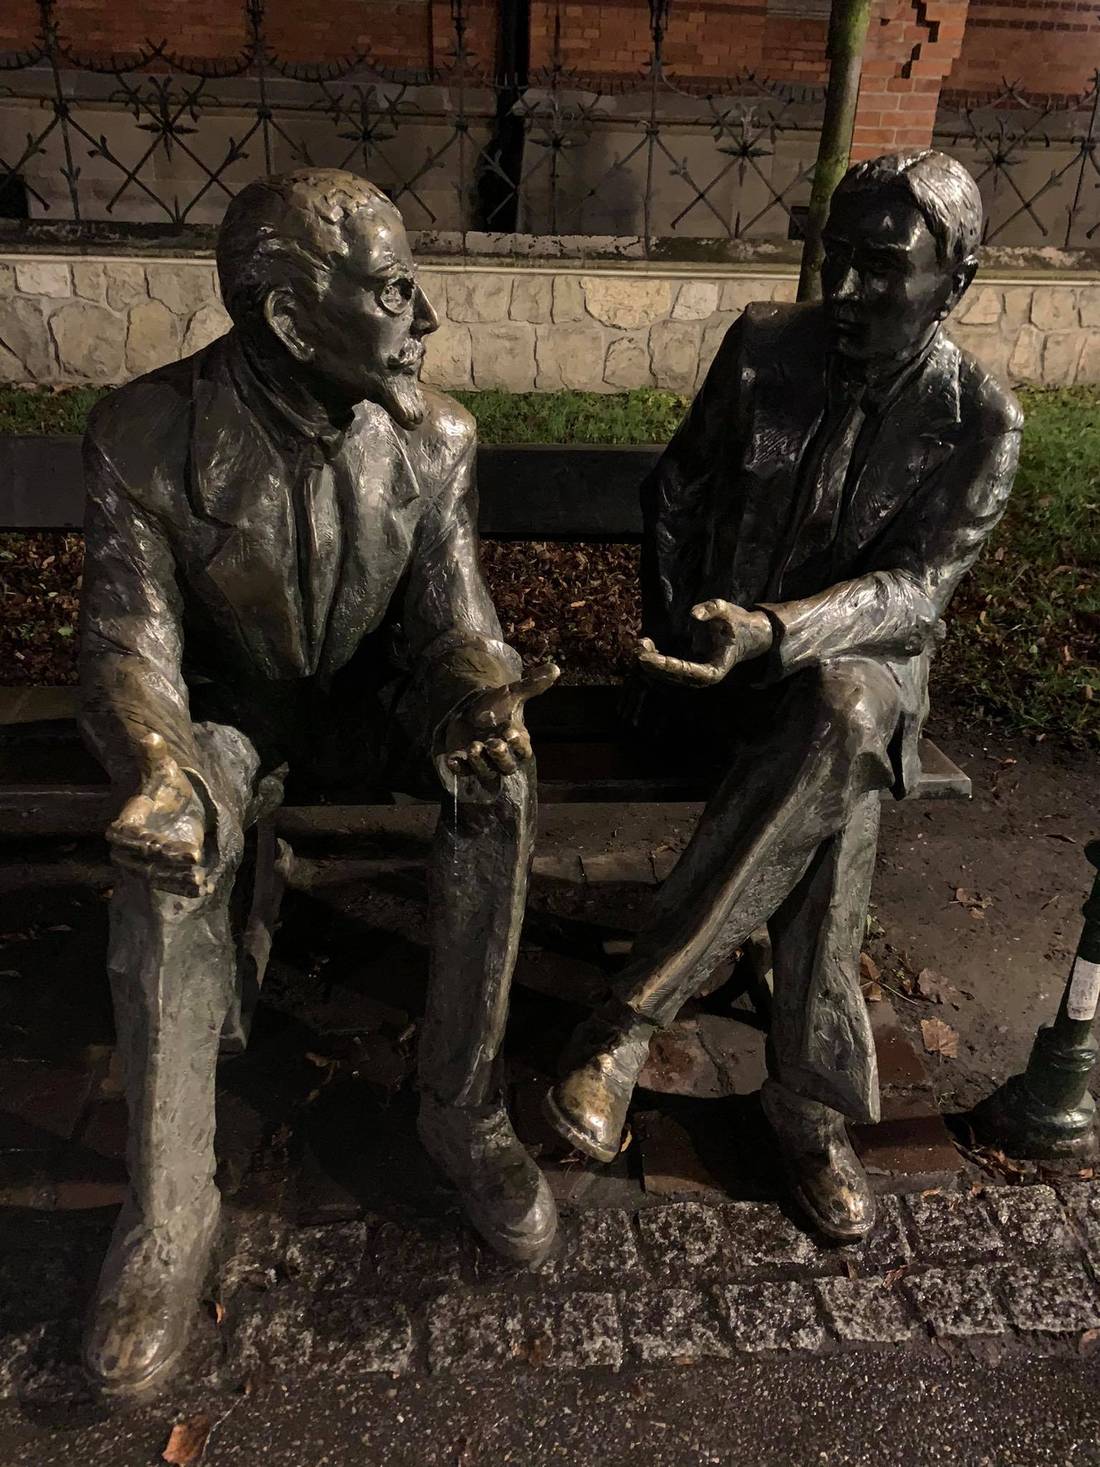 Two students on a bench in Planty park, Kraków